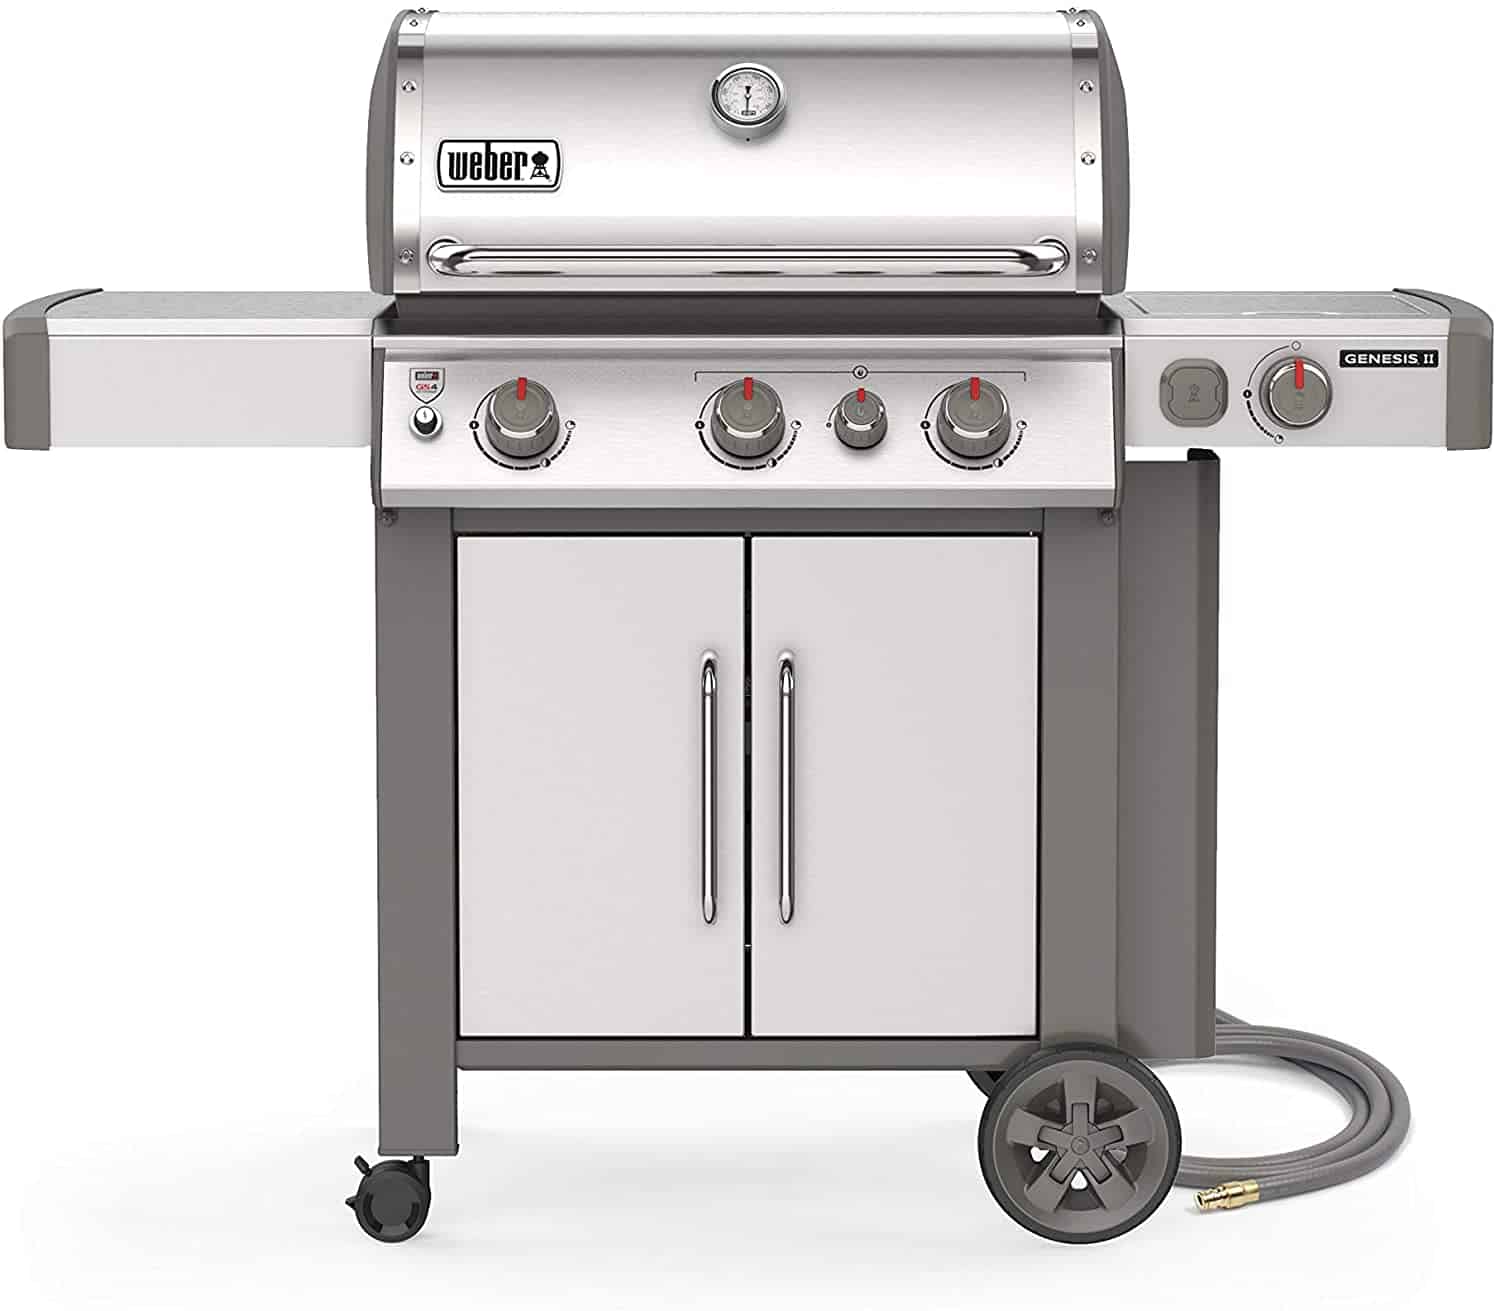 Best overall stainless steel grill- Weber Genesis II S-335